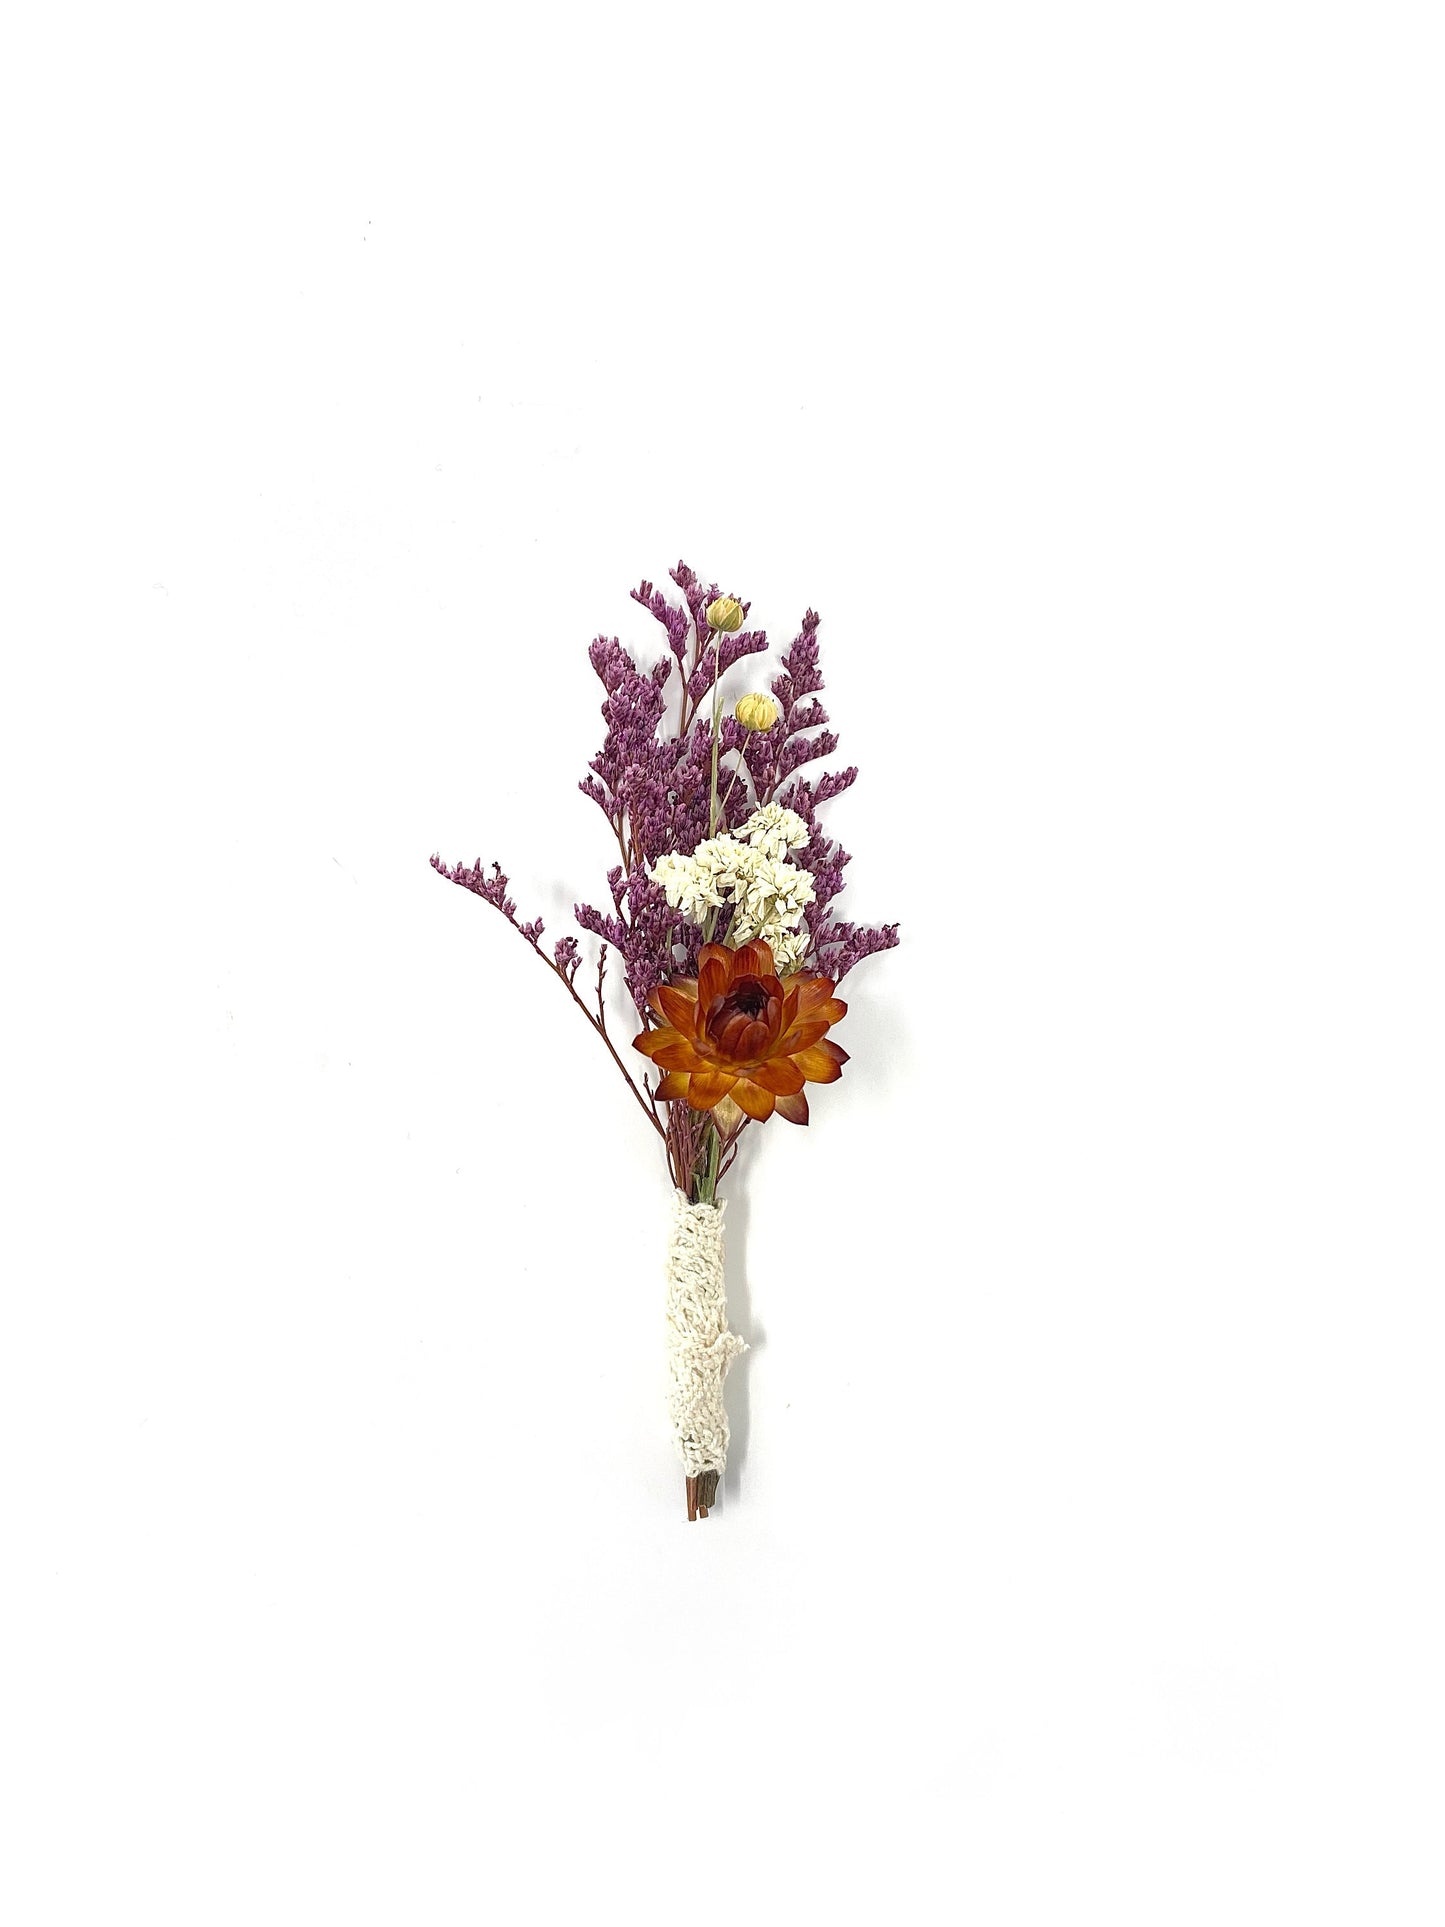 Floral Bouquet, Wedding, Purple and Orange, Dried Flowers, Bridal, Caspia, House Decor, Preserved Flowers, Straw Flowers, Fall